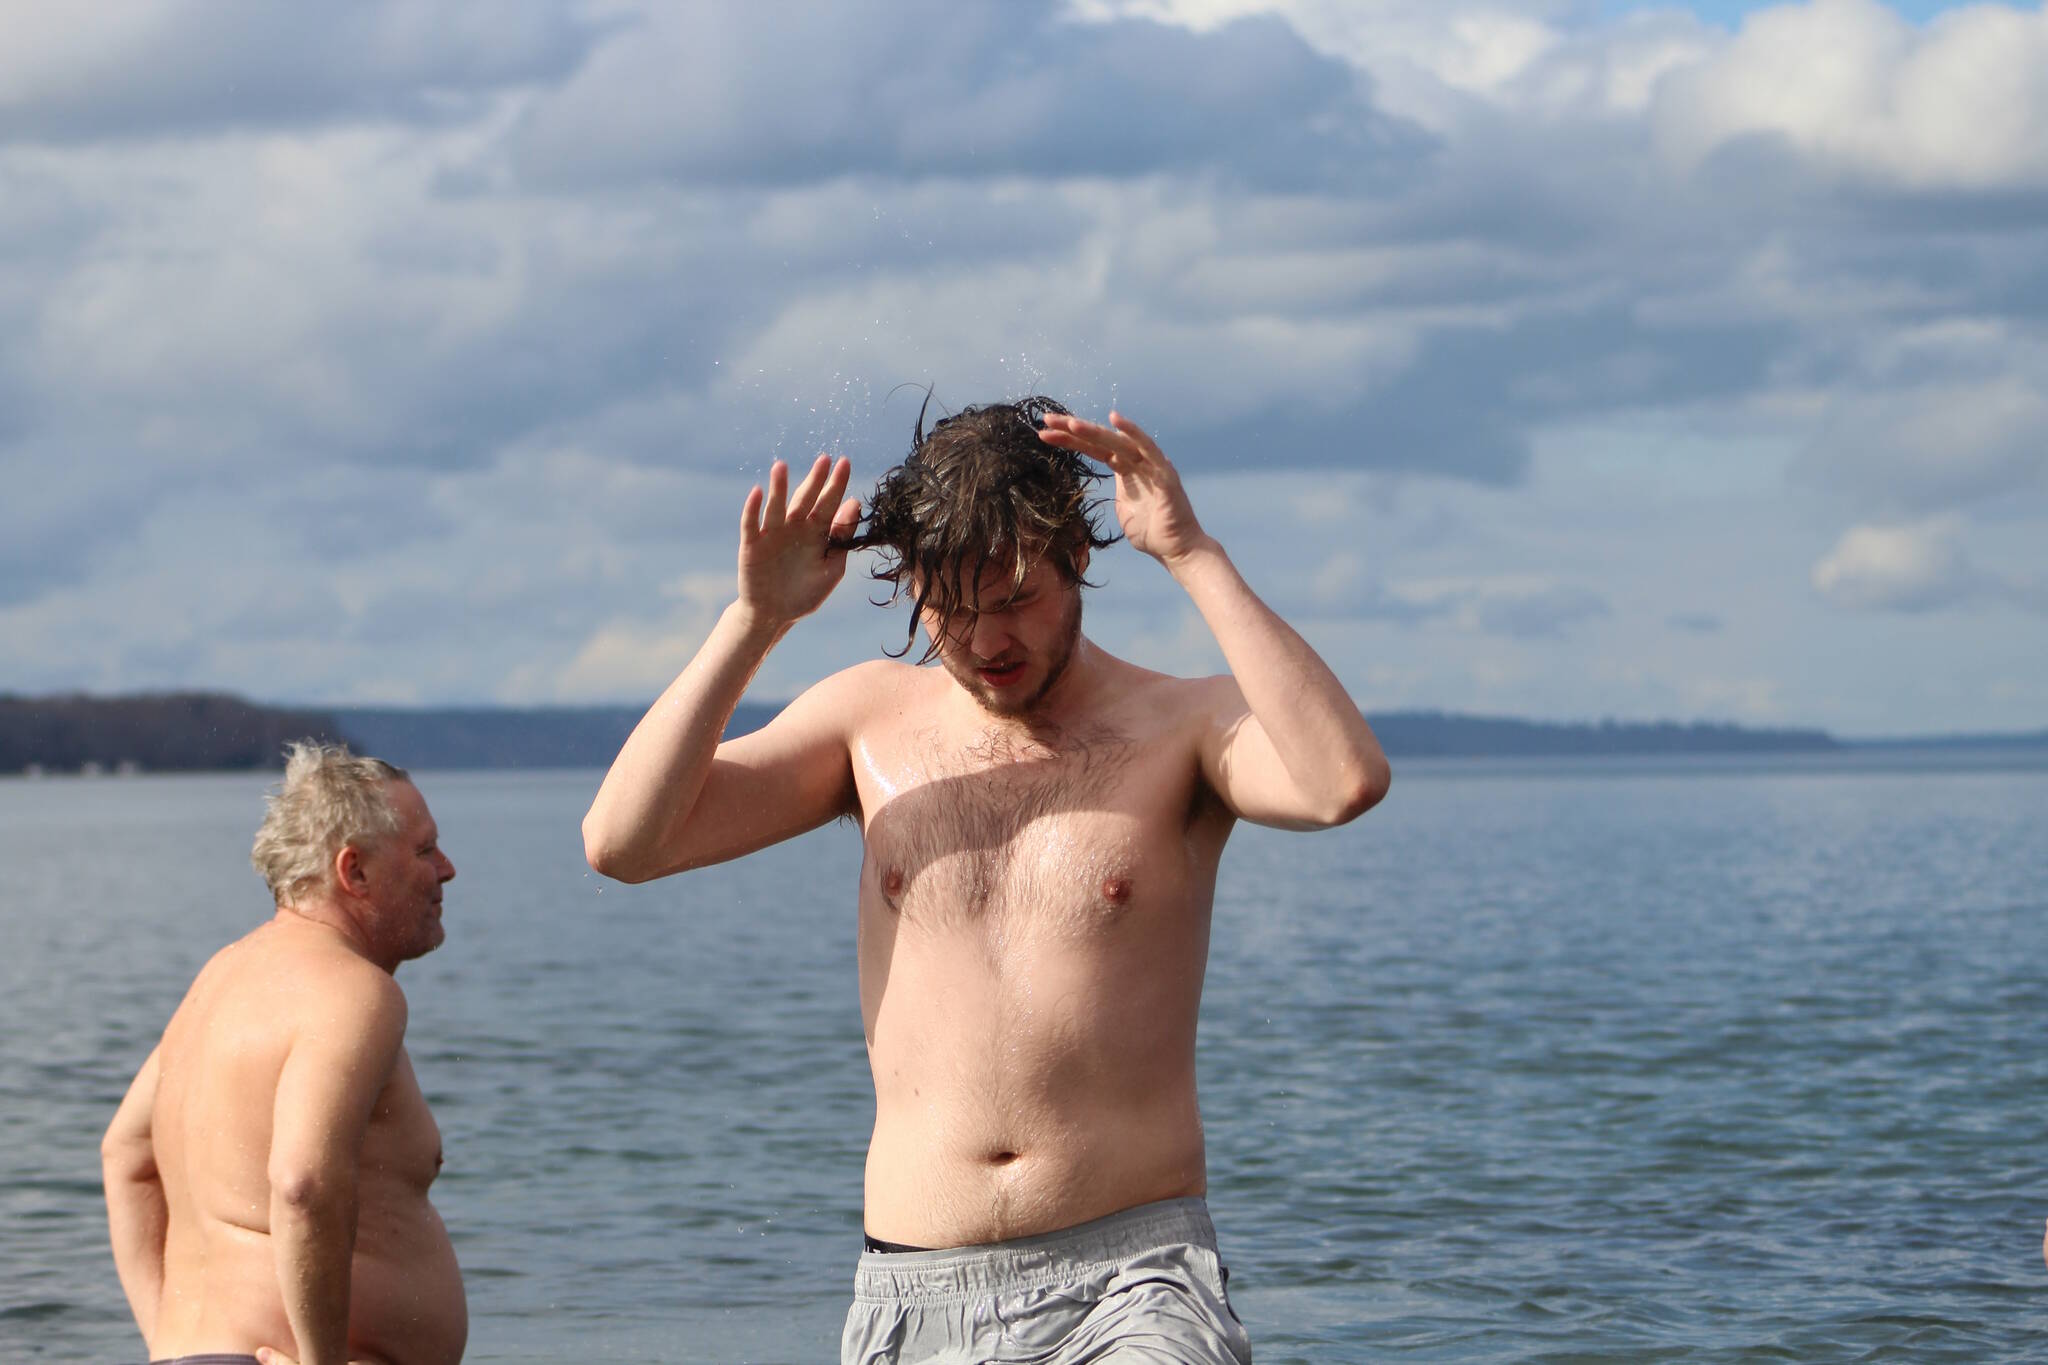 More than a dozen people plunged into the chilly waters of the Puget Sound on Saturday, March 10, for the Marine Hills Swim and Tennis Club Polar Bear Plunge. Alex Bruell / The Mirror